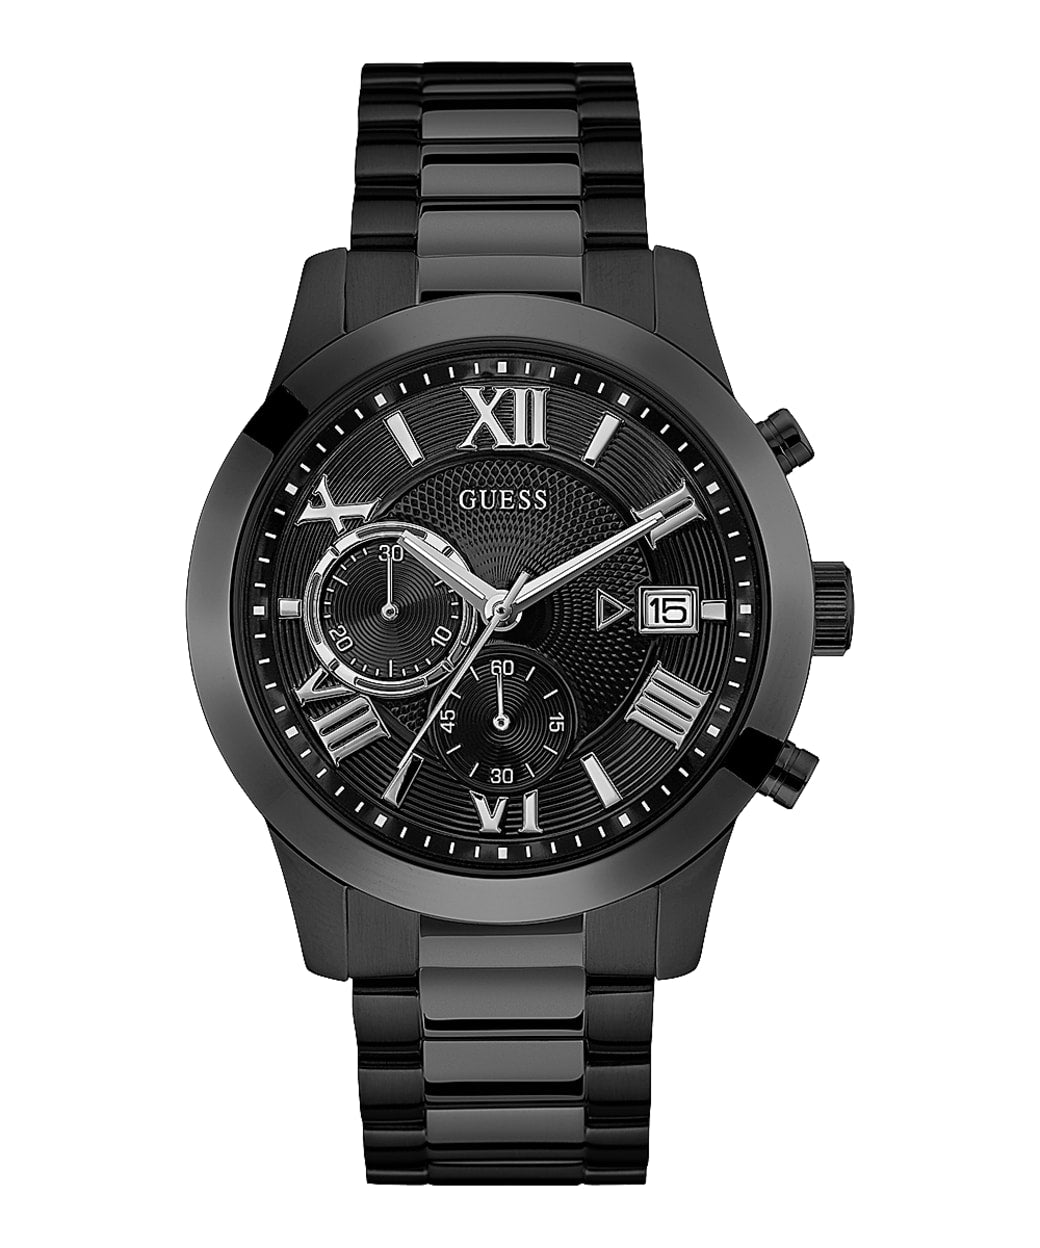 Guess Men's Black Classic Style Chronograph Watch W0668G5